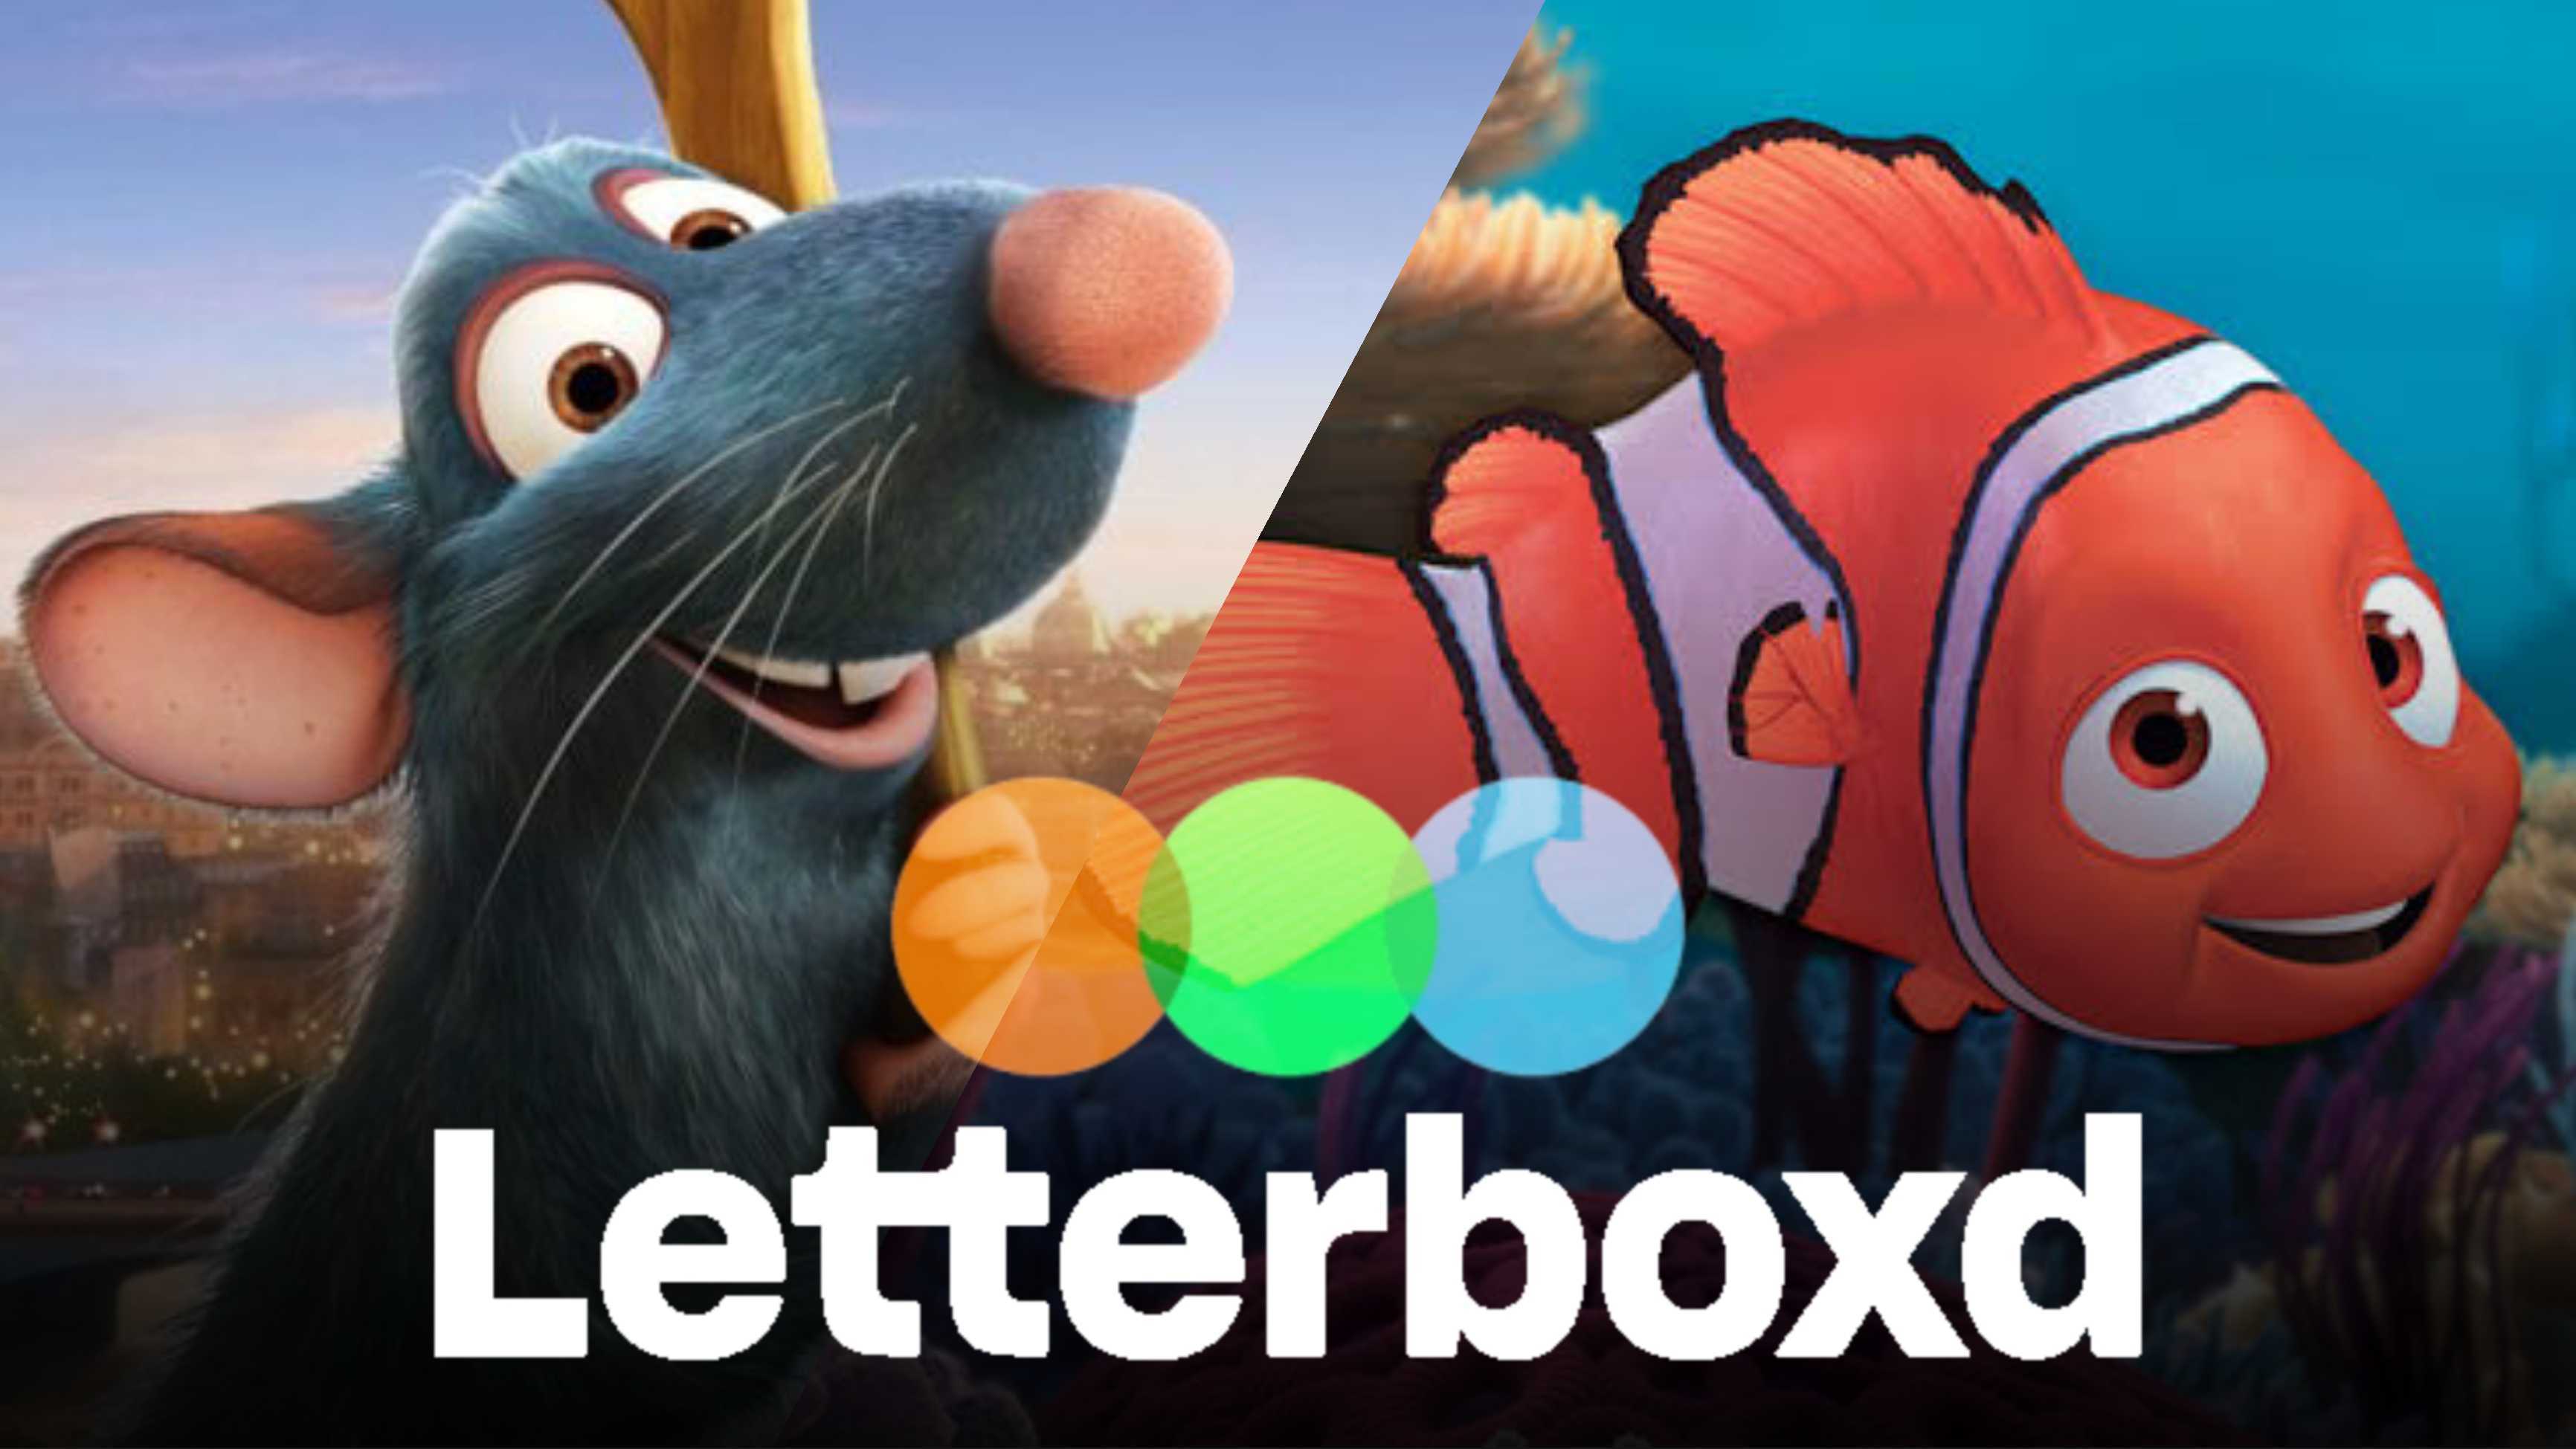 ‘Ratatouille’ & ‘Finding Nemo’ Join Letterboxd’s One Million Watched Club